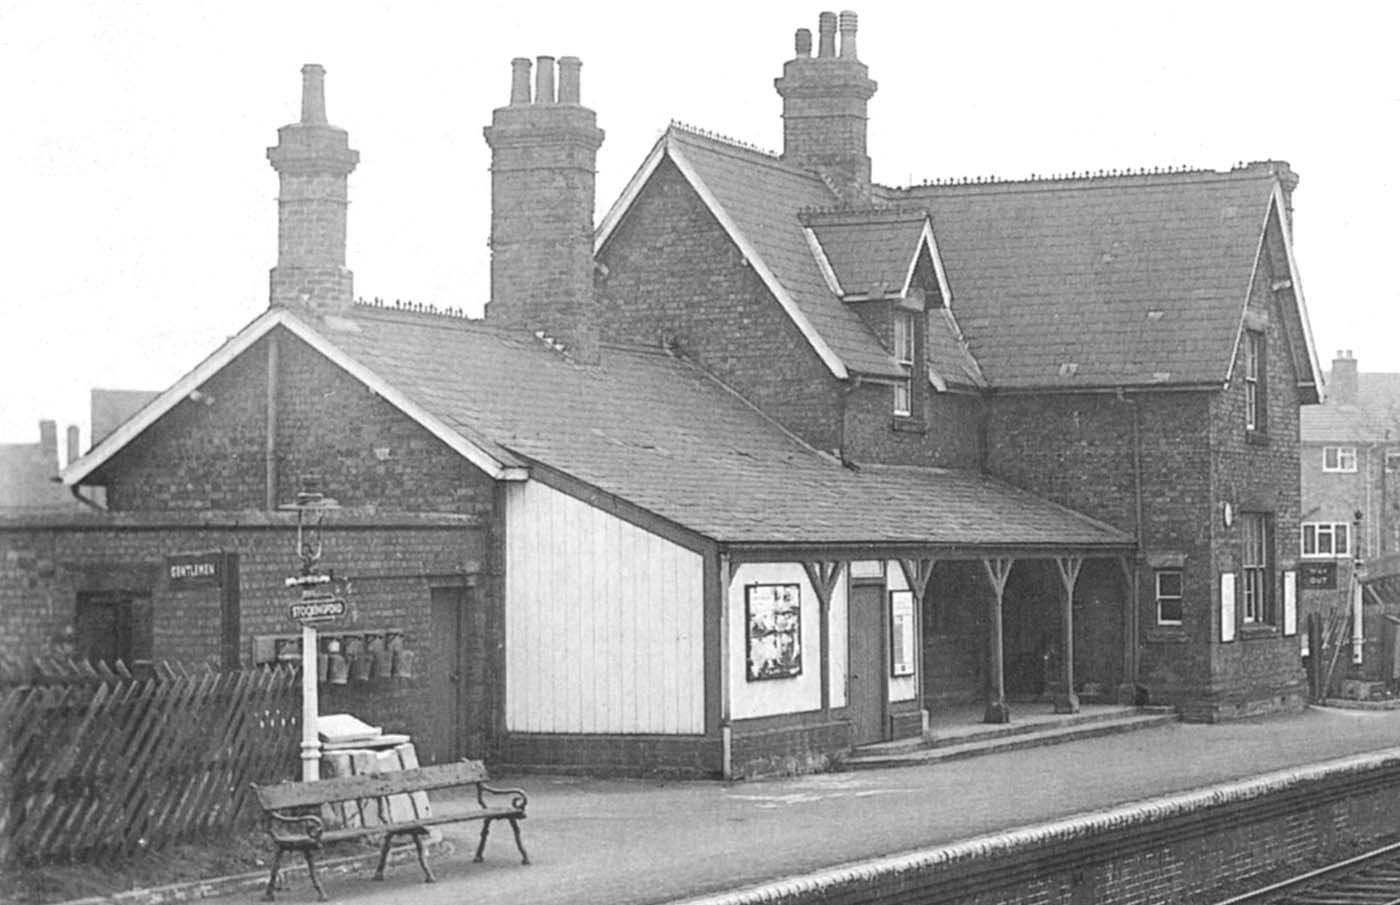 Close up showing Stockingford station and its sparse furniture a few months before it was to close